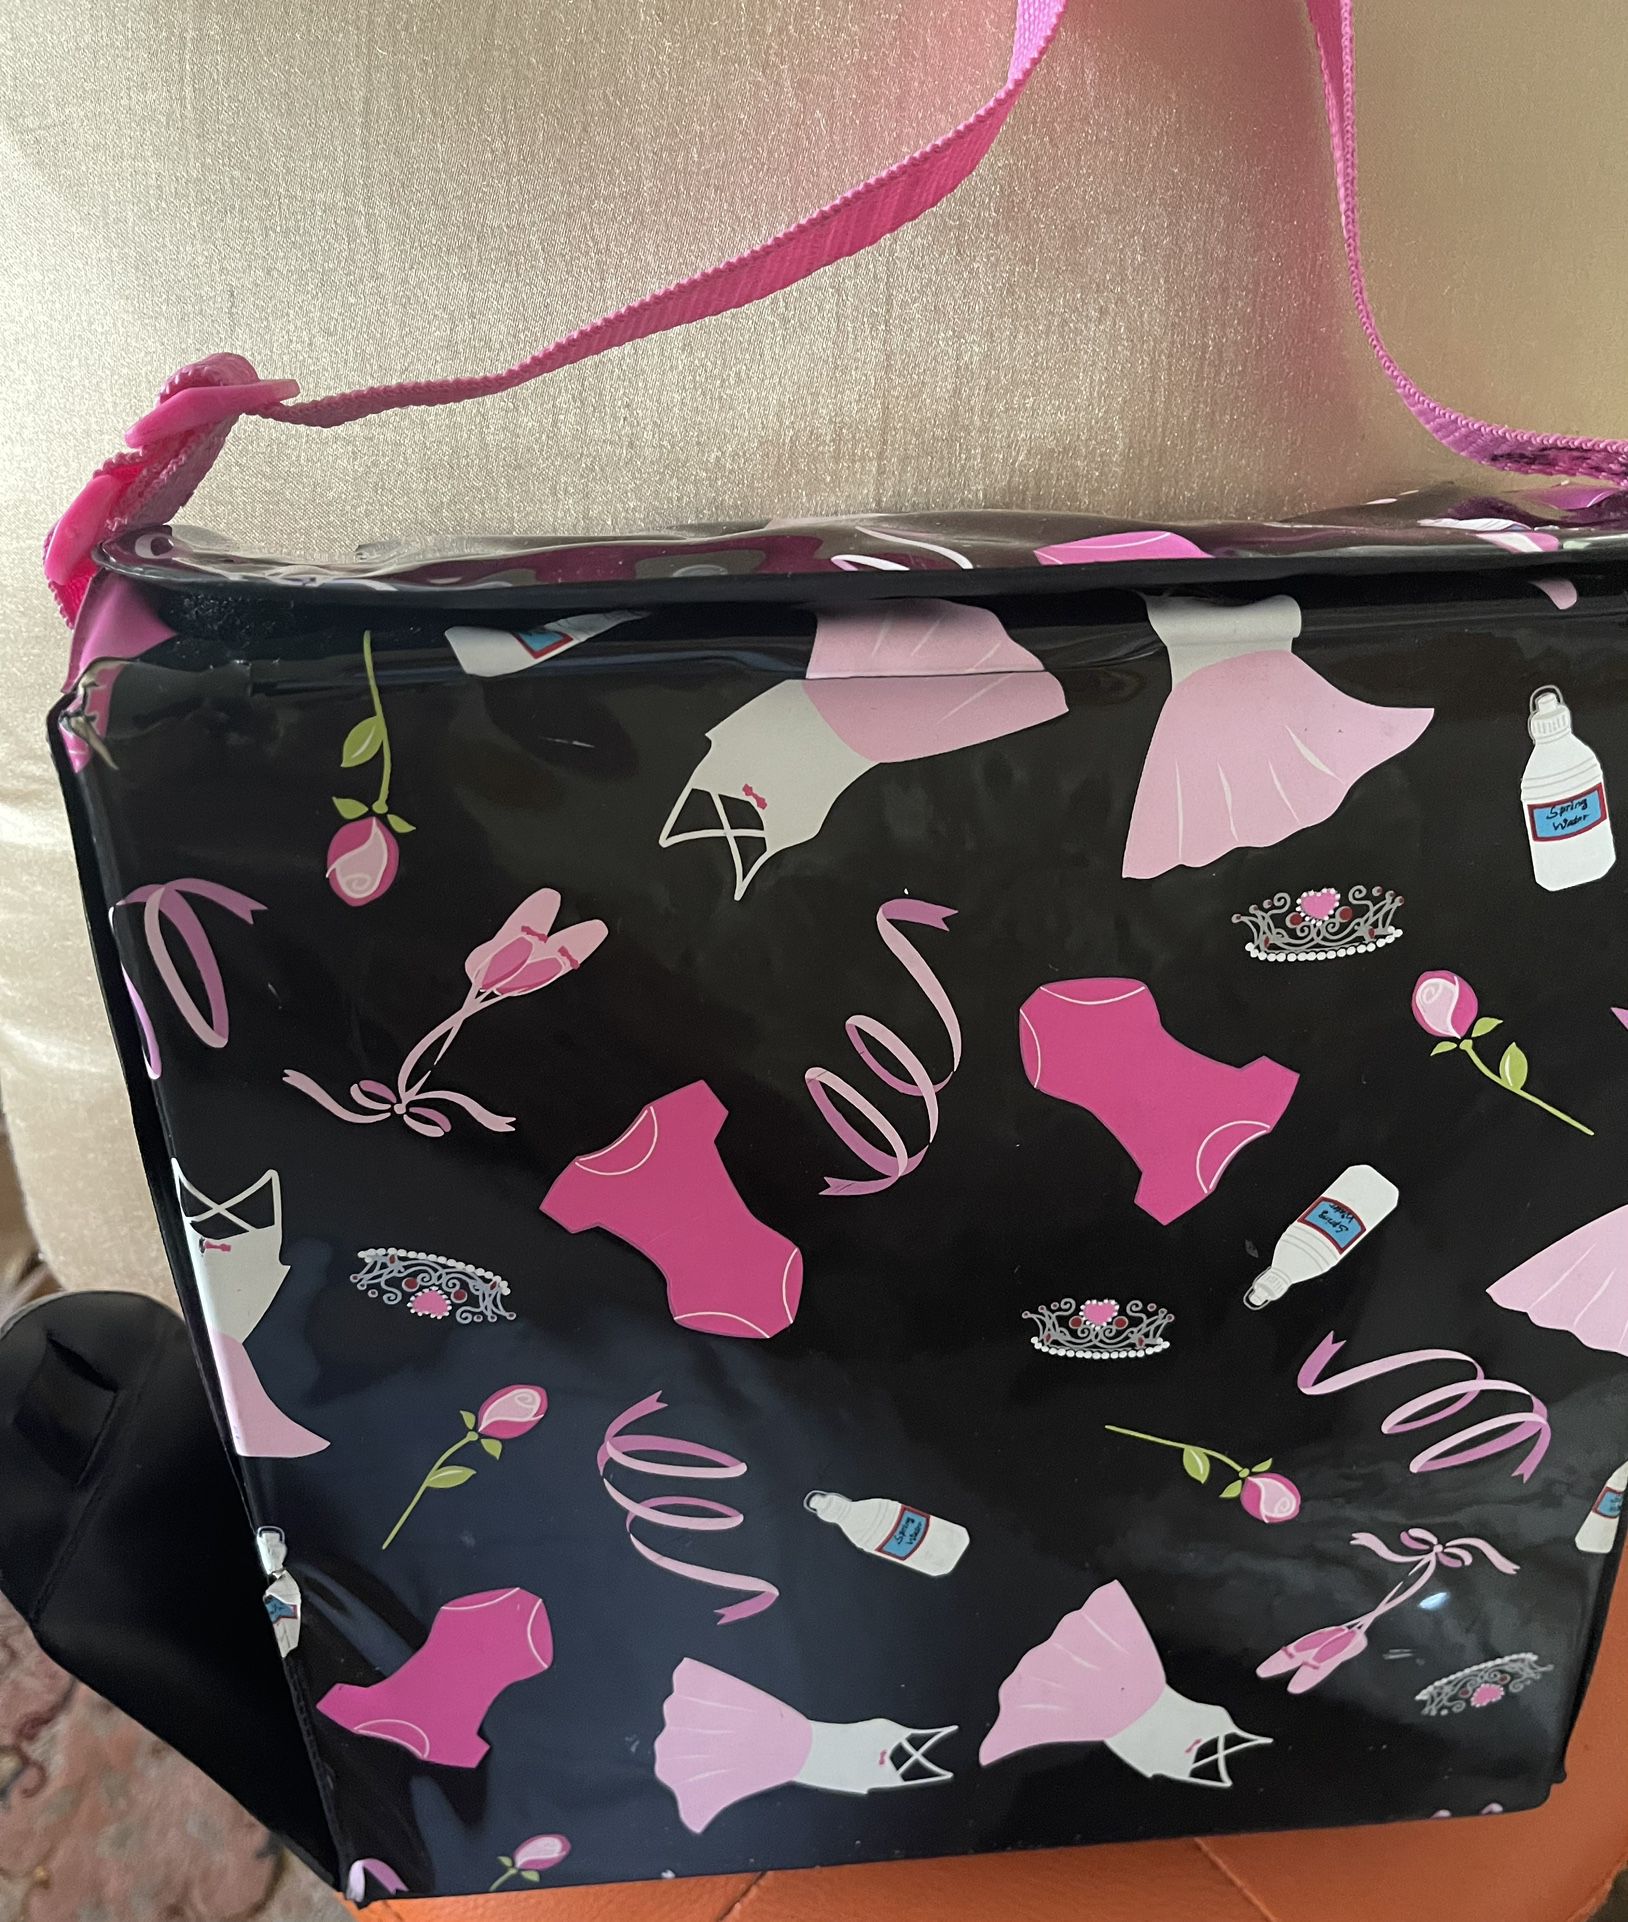  NEW BALLERINA DANCE BAG! Place for shoes and separate place for clothing and water. Black Decorated with cute pink dance outfits.